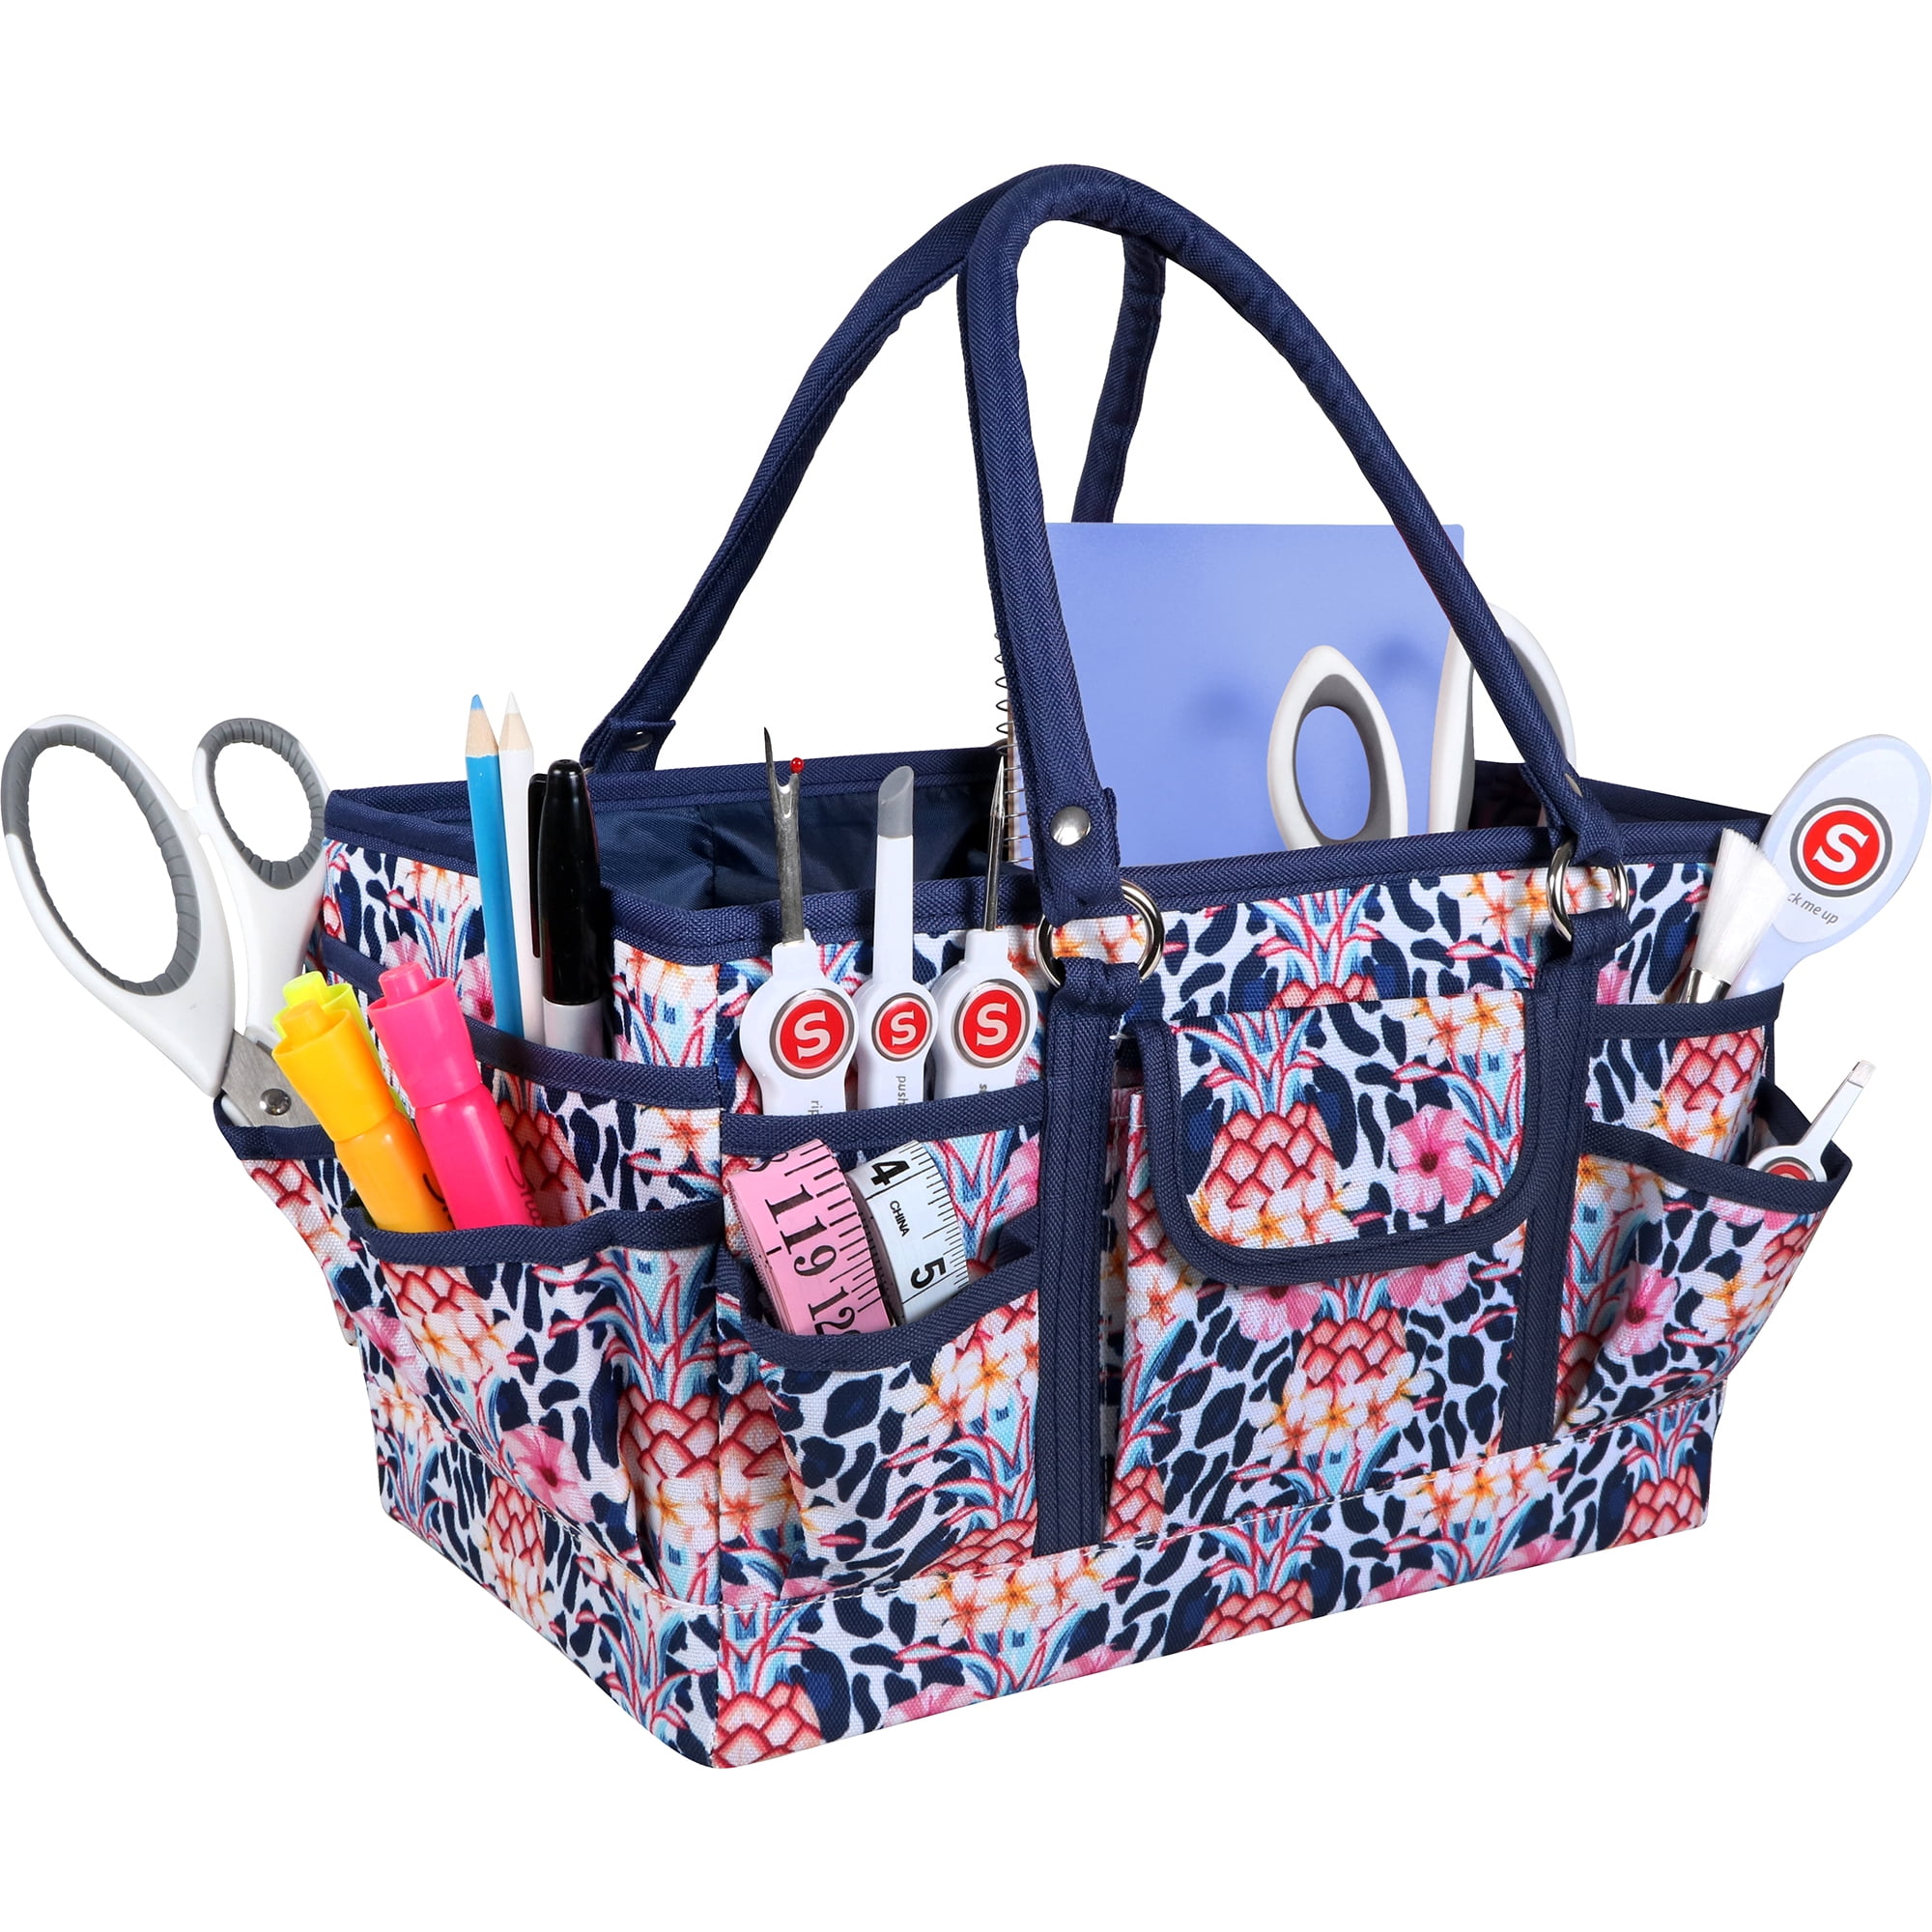 Everything Mary Large Craft Storage Organizer Bag, Polka Dot - Organizers  for Art and Sewing - Tote Basket for Supplies, Arts